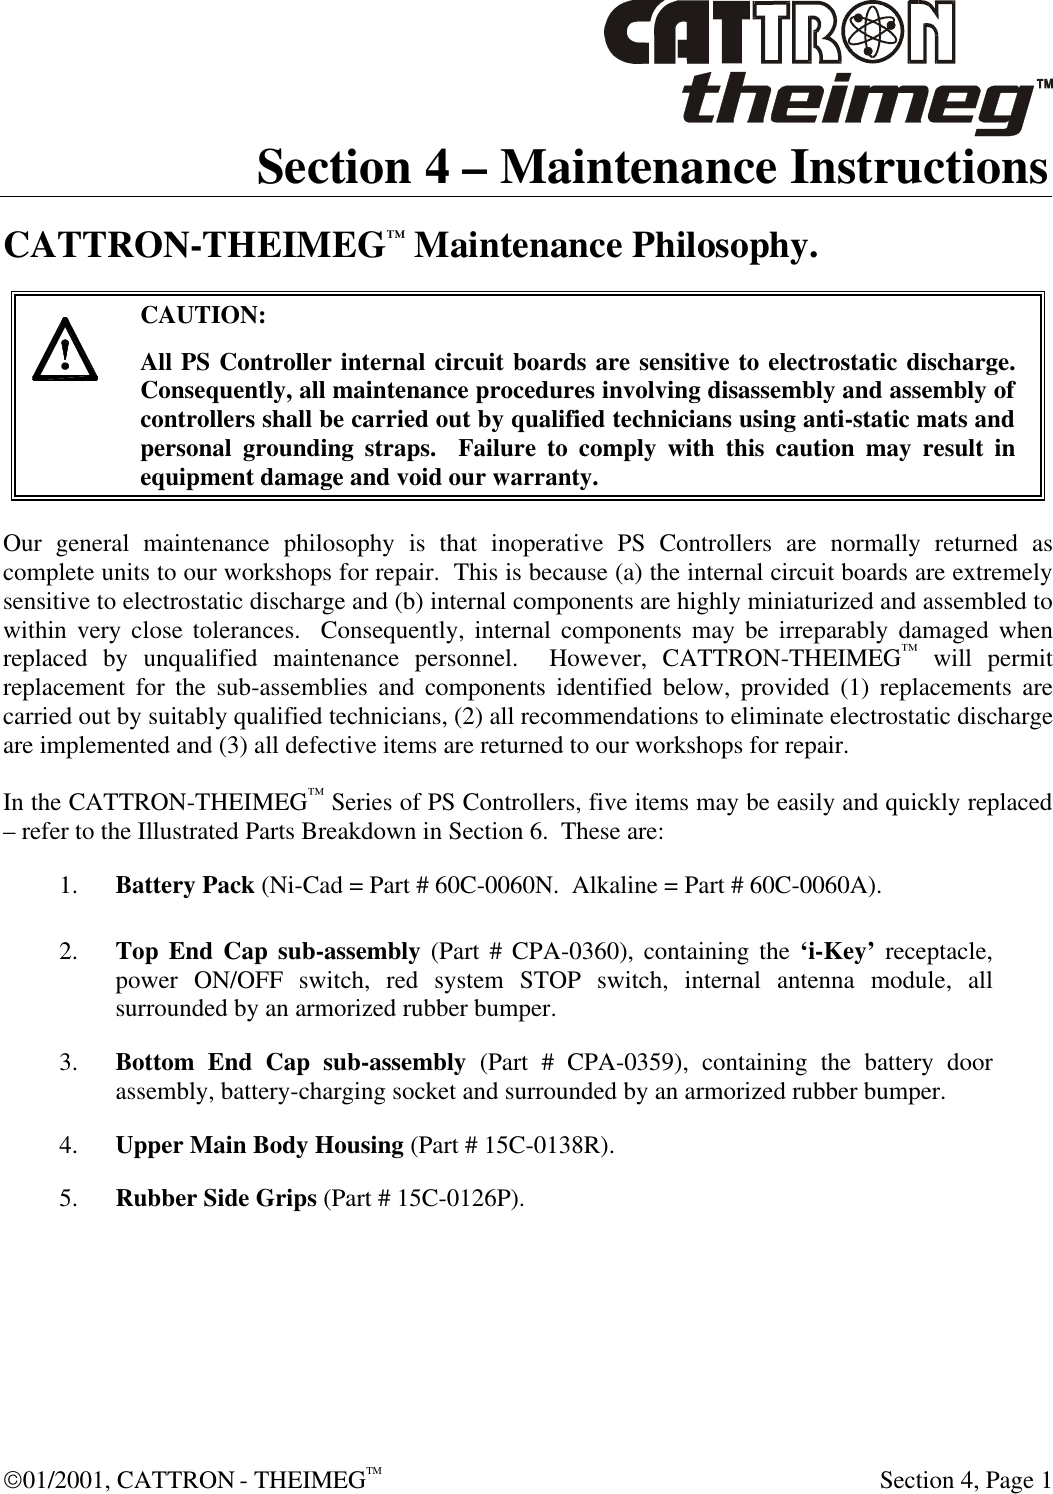  01/2001, CATTRON - THEIMEGTM  Section 4, Page 1 Section 4 – Maintenance Instructions CATTRON-THEIMEG™ Maintenance Philosophy.     CAUTION: All PS Controller internal circuit boards are sensitive to electrostatic discharge.  Consequently, all maintenance procedures involving disassembly and assembly of controllers shall be carried out by qualified technicians using anti-static mats and personal grounding straps.  Failure to comply with this caution may result in equipment damage and void our warranty.  Our general maintenance philosophy is that inoperative PS Controllers are normally returned as complete units to our workshops for repair.  This is because (a) the internal circuit boards are extremely sensitive to electrostatic discharge and (b) internal components are highly miniaturized and assembled to within very close tolerances.  Consequently, internal components may be irreparably damaged when replaced by unqualified maintenance personnel.  However, CATTRON-THEIMEG™ will permit replacement for the sub-assemblies and components identified below, provided (1) replacements are carried out by suitably qualified technicians, (2) all recommendations to eliminate electrostatic discharge are implemented and (3) all defective items are returned to our workshops for repair.   In the CATTRON-THEIMEG™ Series of PS Controllers, five items may be easily and quickly replaced – refer to the Illustrated Parts Breakdown in Section 6.  These are: 1. Battery Pack (Ni-Cad = Part # 60C-0060N.  Alkaline = Part # 60C-0060A). 2. Top End Cap sub-assembly (Part # CPA-0360), containing the ‘i-Key’ receptacle, power ON/OFF switch, red system STOP switch, internal antenna module, all surrounded by an armorized rubber bumper. 3. Bottom End Cap sub-assembly (Part # CPA-0359), containing the battery door assembly, battery-charging socket and surrounded by an armorized rubber bumper. 4. Upper Main Body Housing (Part # 15C-0138R). 5. Rubber Side Grips (Part # 15C-0126P). 